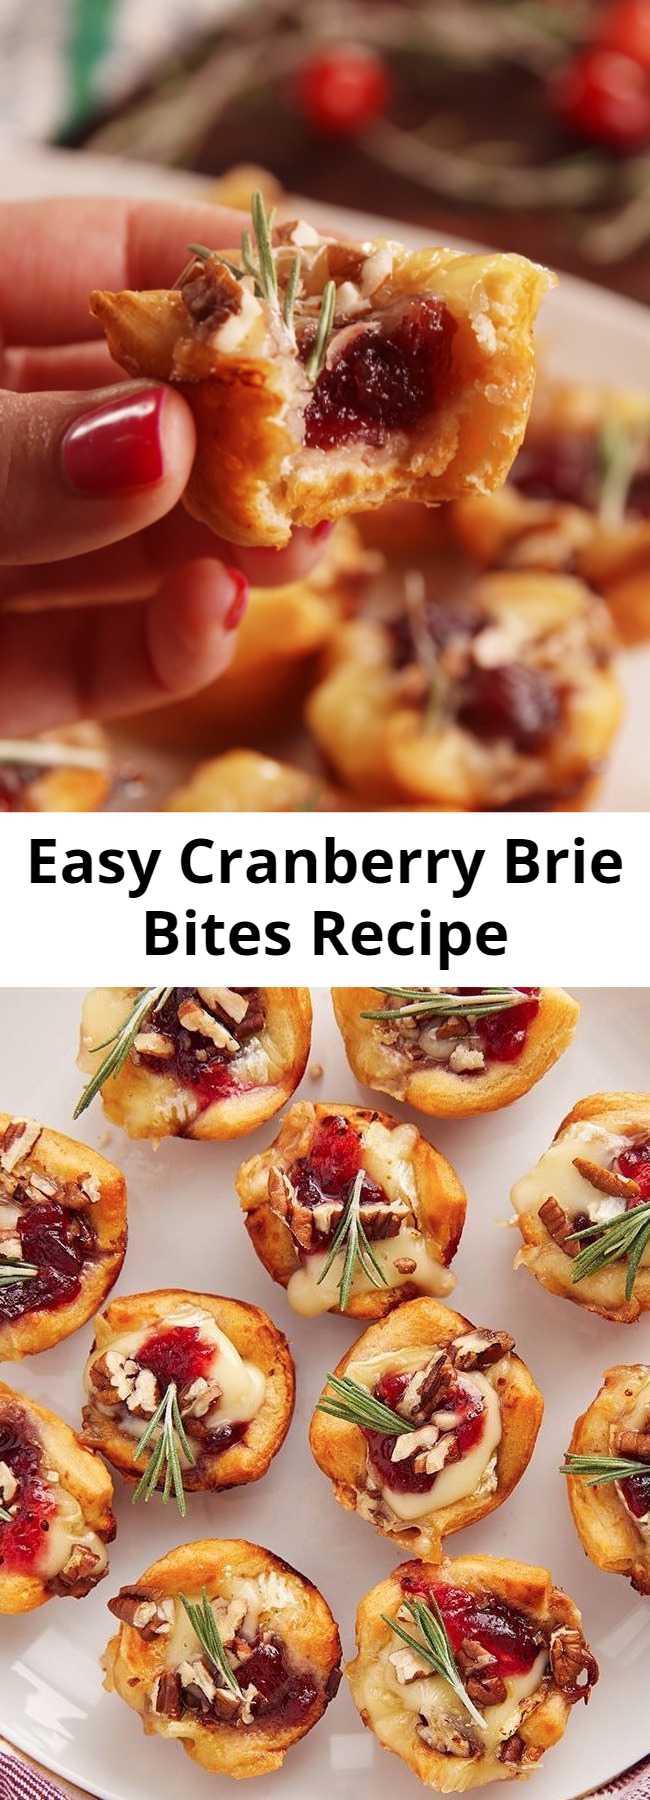 Easy Cranberry Brie Bites Recipe - These Cranberry Brie Bites are perfect for your next holiday party. Why make dough from scratch when everyone loves the canned stuff?! These little guys are the perfect appetizer to make during the holidays. Be warned: It'll forever change the way you think about brie. #easy #recipe #holidays #christmas #thanksgiving #party #appetizer #fingerfoods #apps #ideas #dinner #cranberry #brie #bites #muffintin #baked #crescentroll #pillsbury #bakedbrie